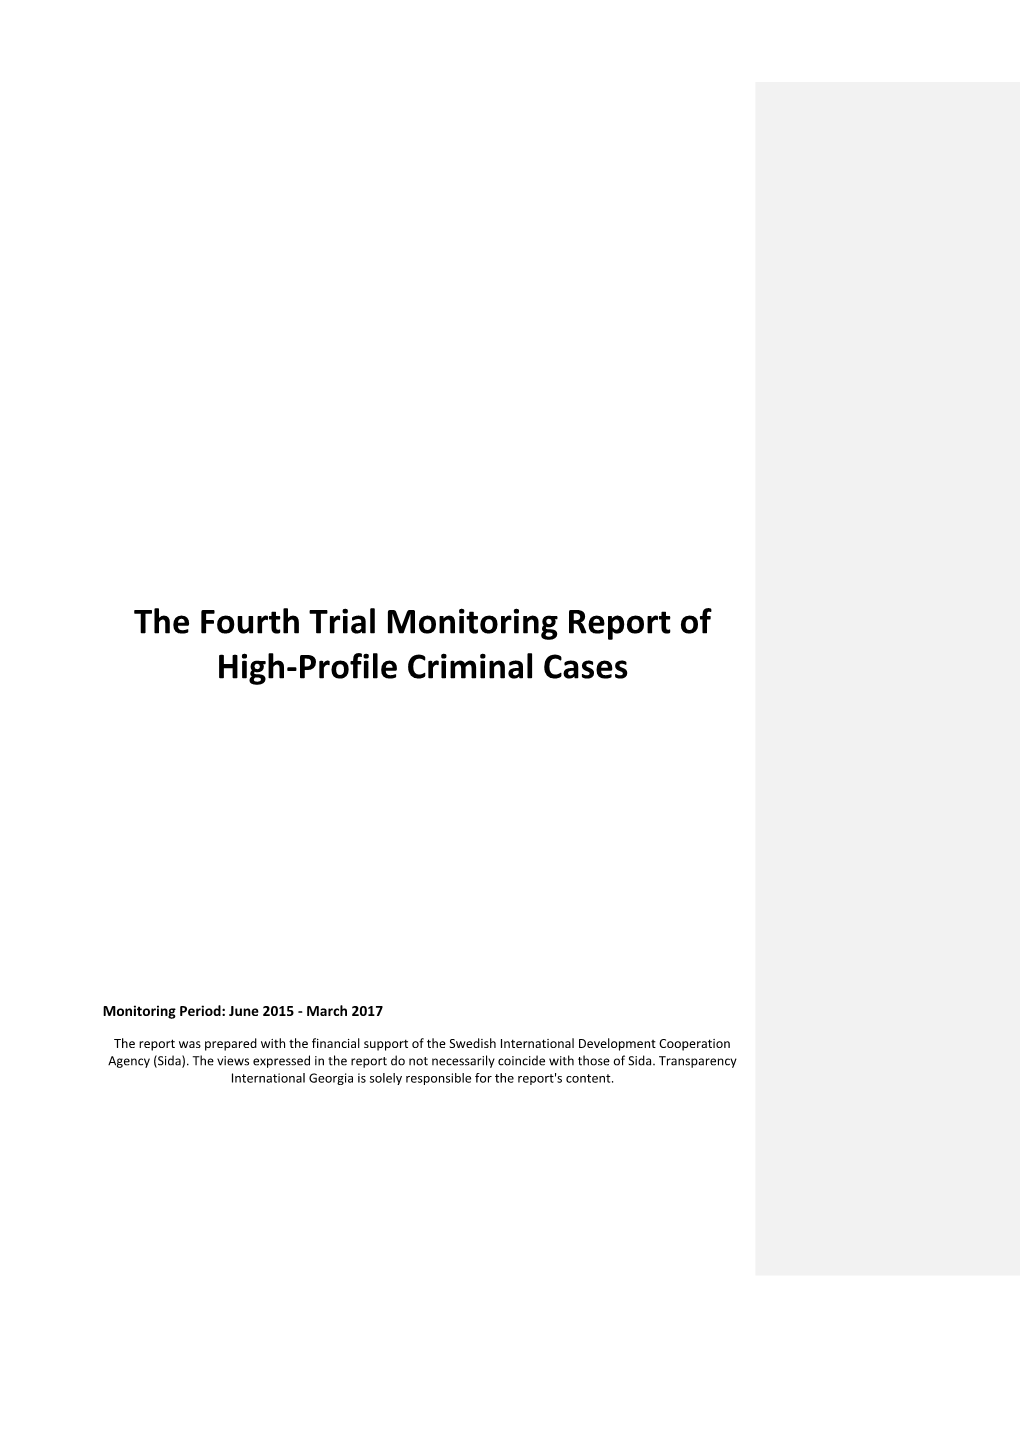 The Fourth Trial Monitoring Report of High-Profile Criminal Cases